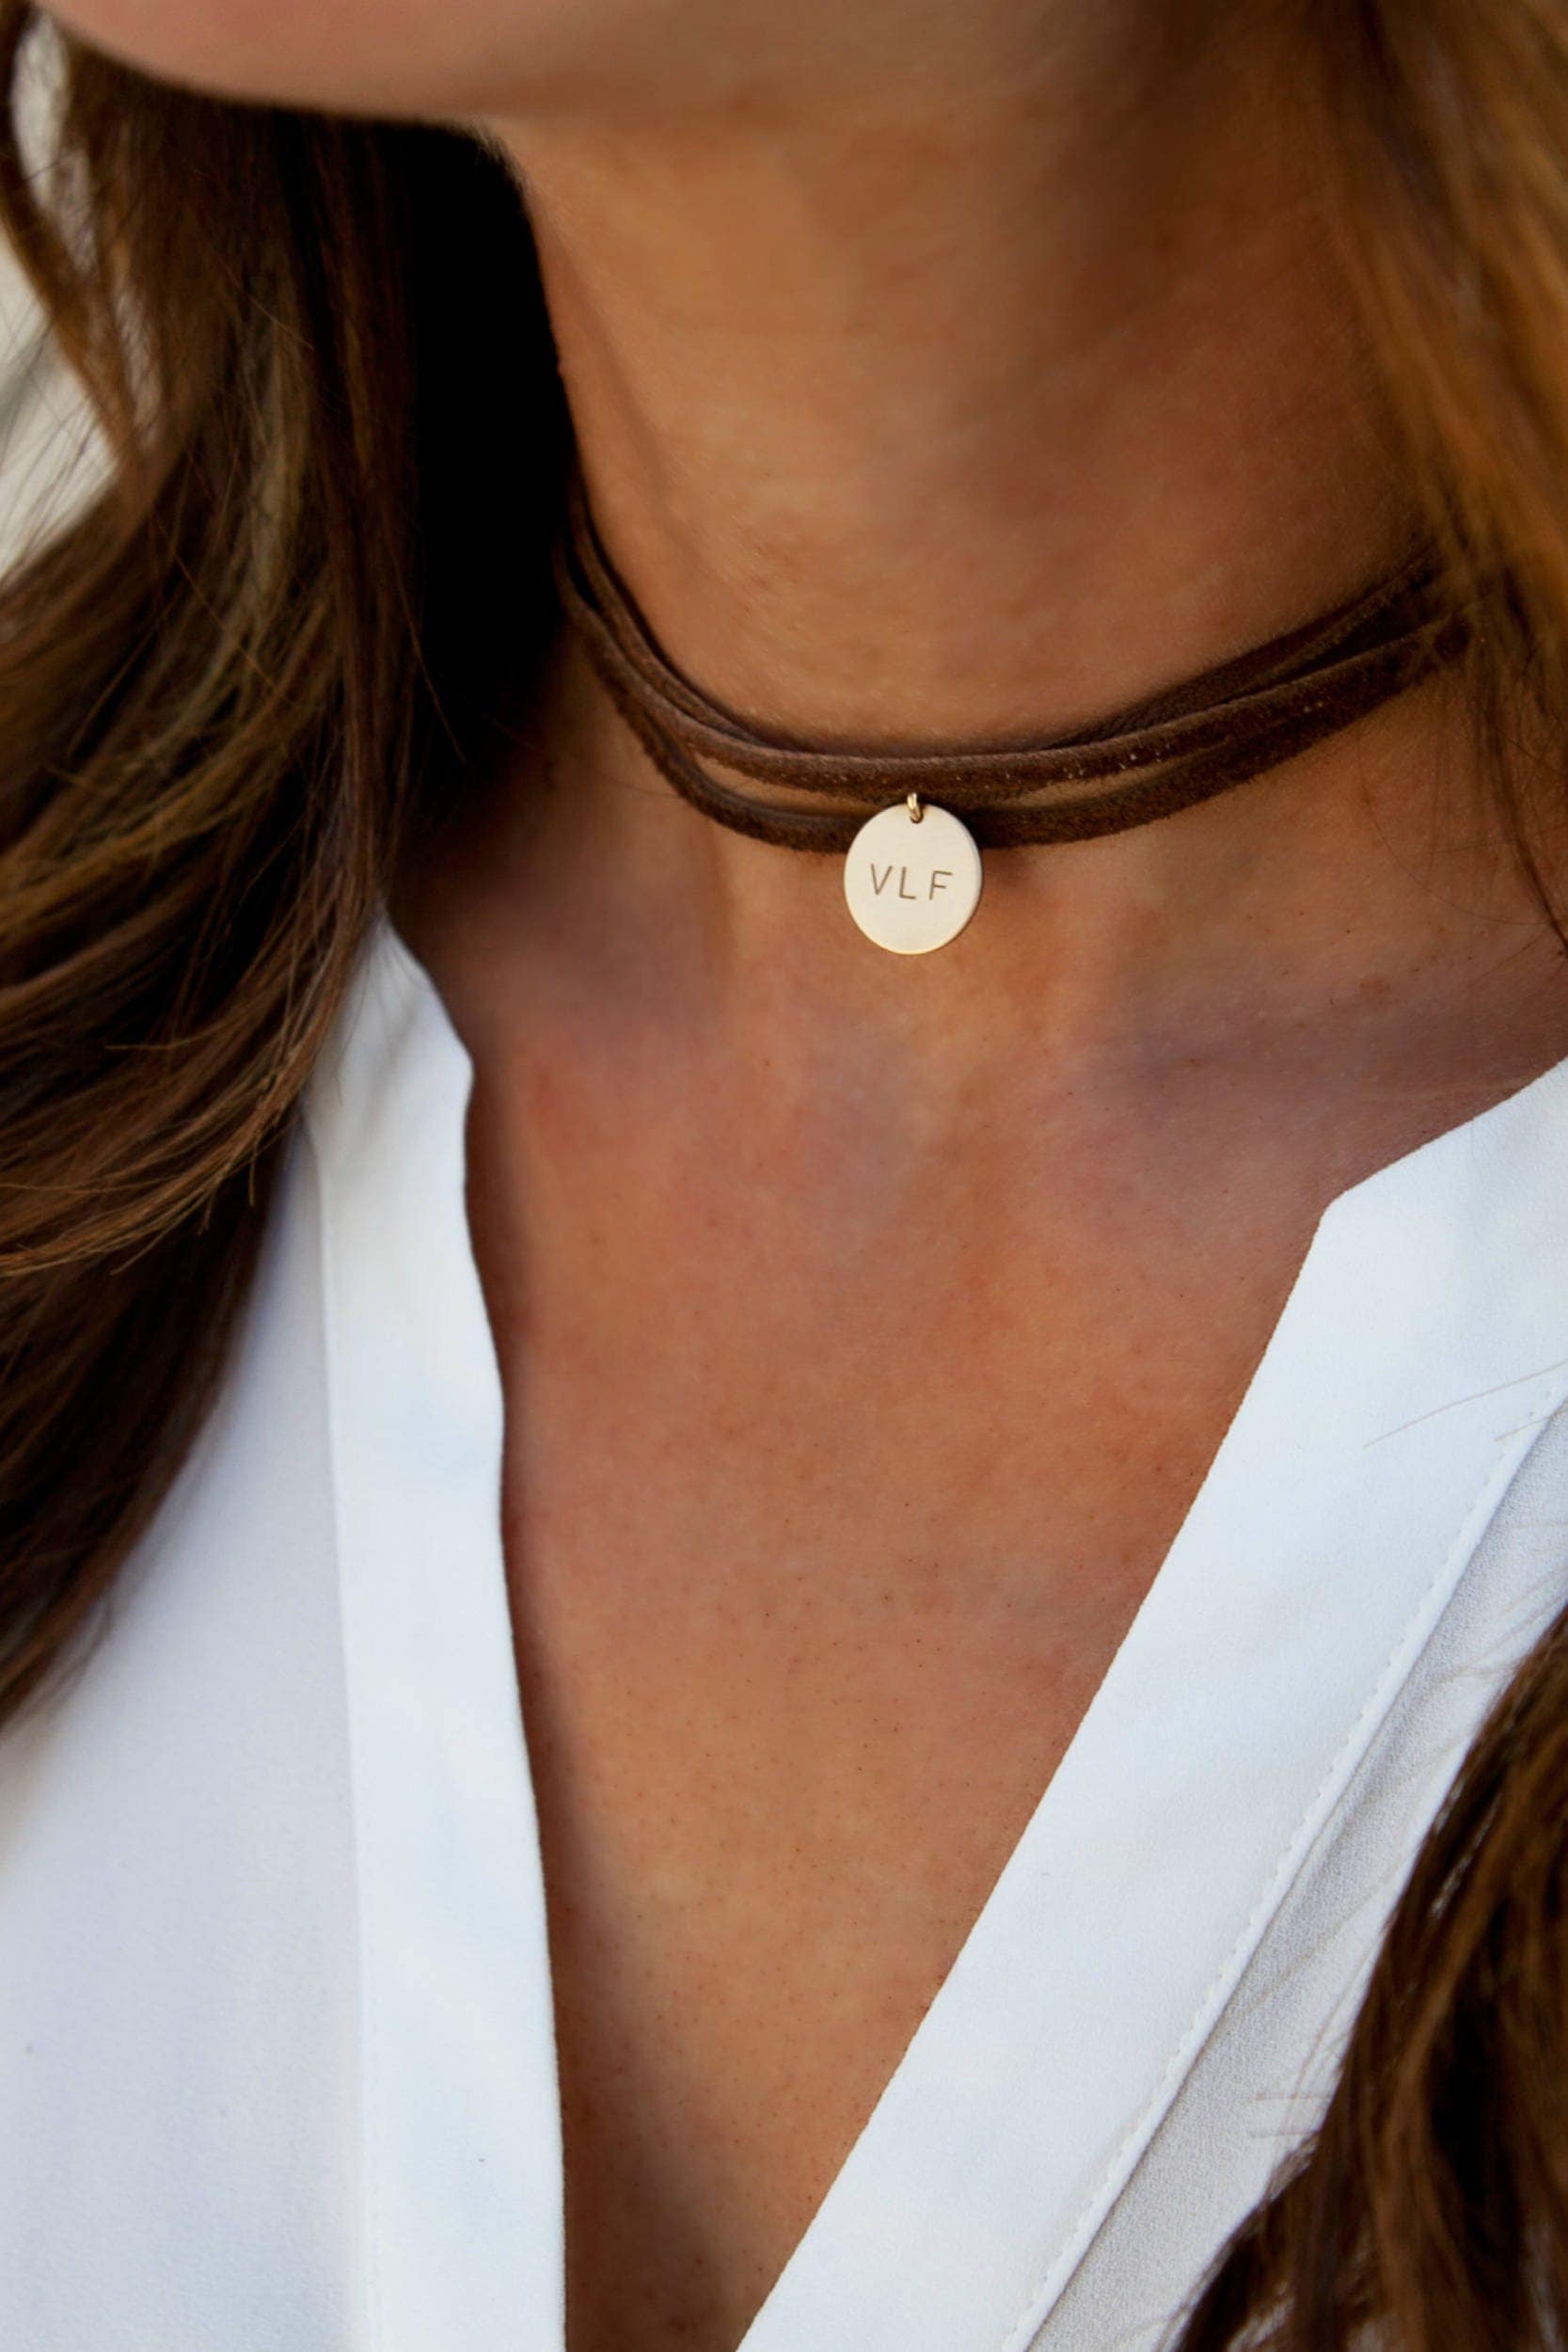 Circle Choker Necklace - Leila Sterling Silver